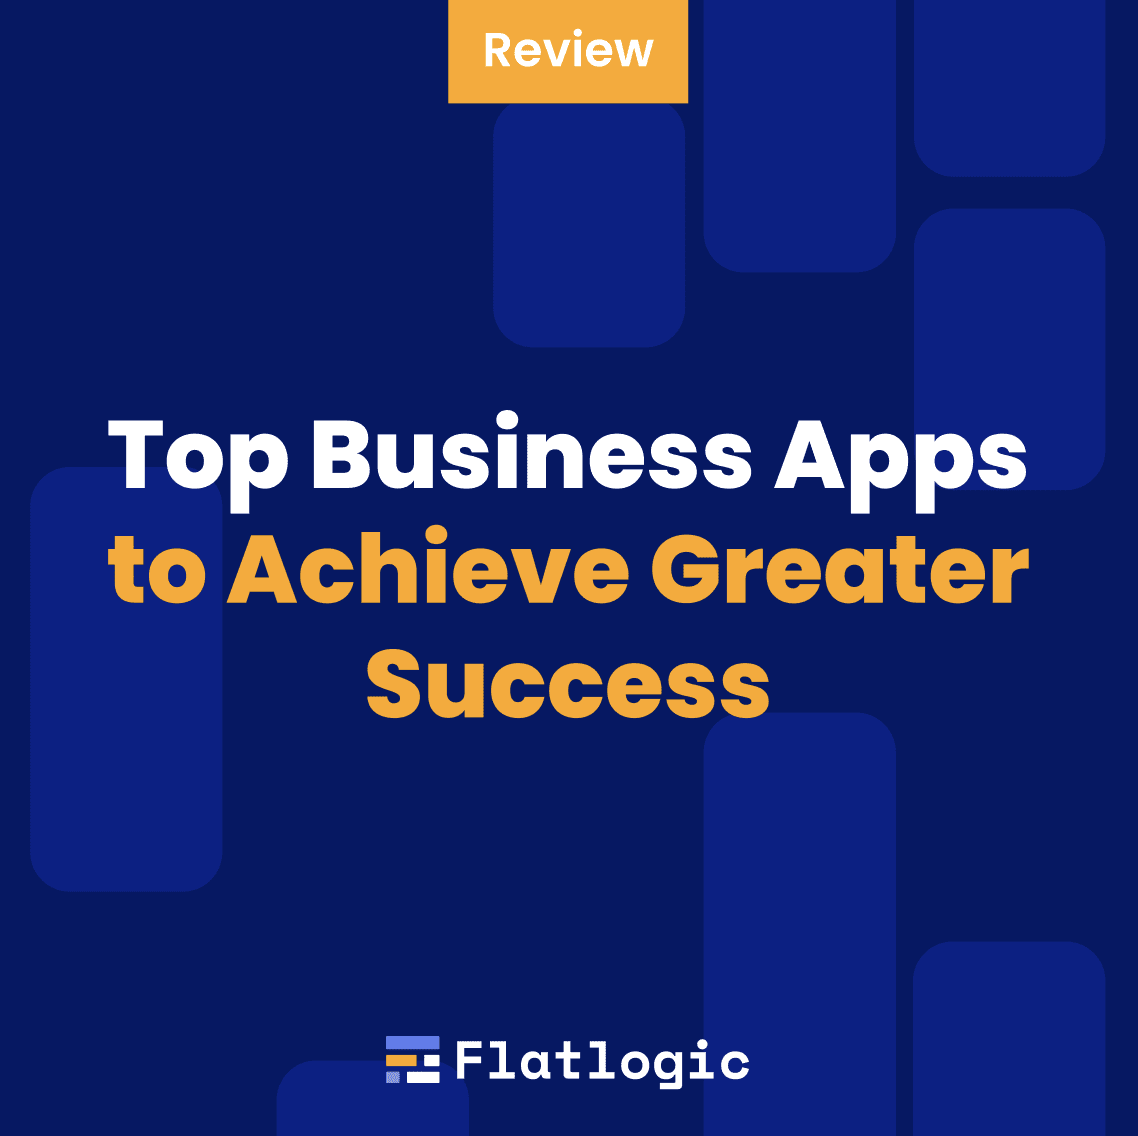 Top Business Apps to Achieve Greater Success